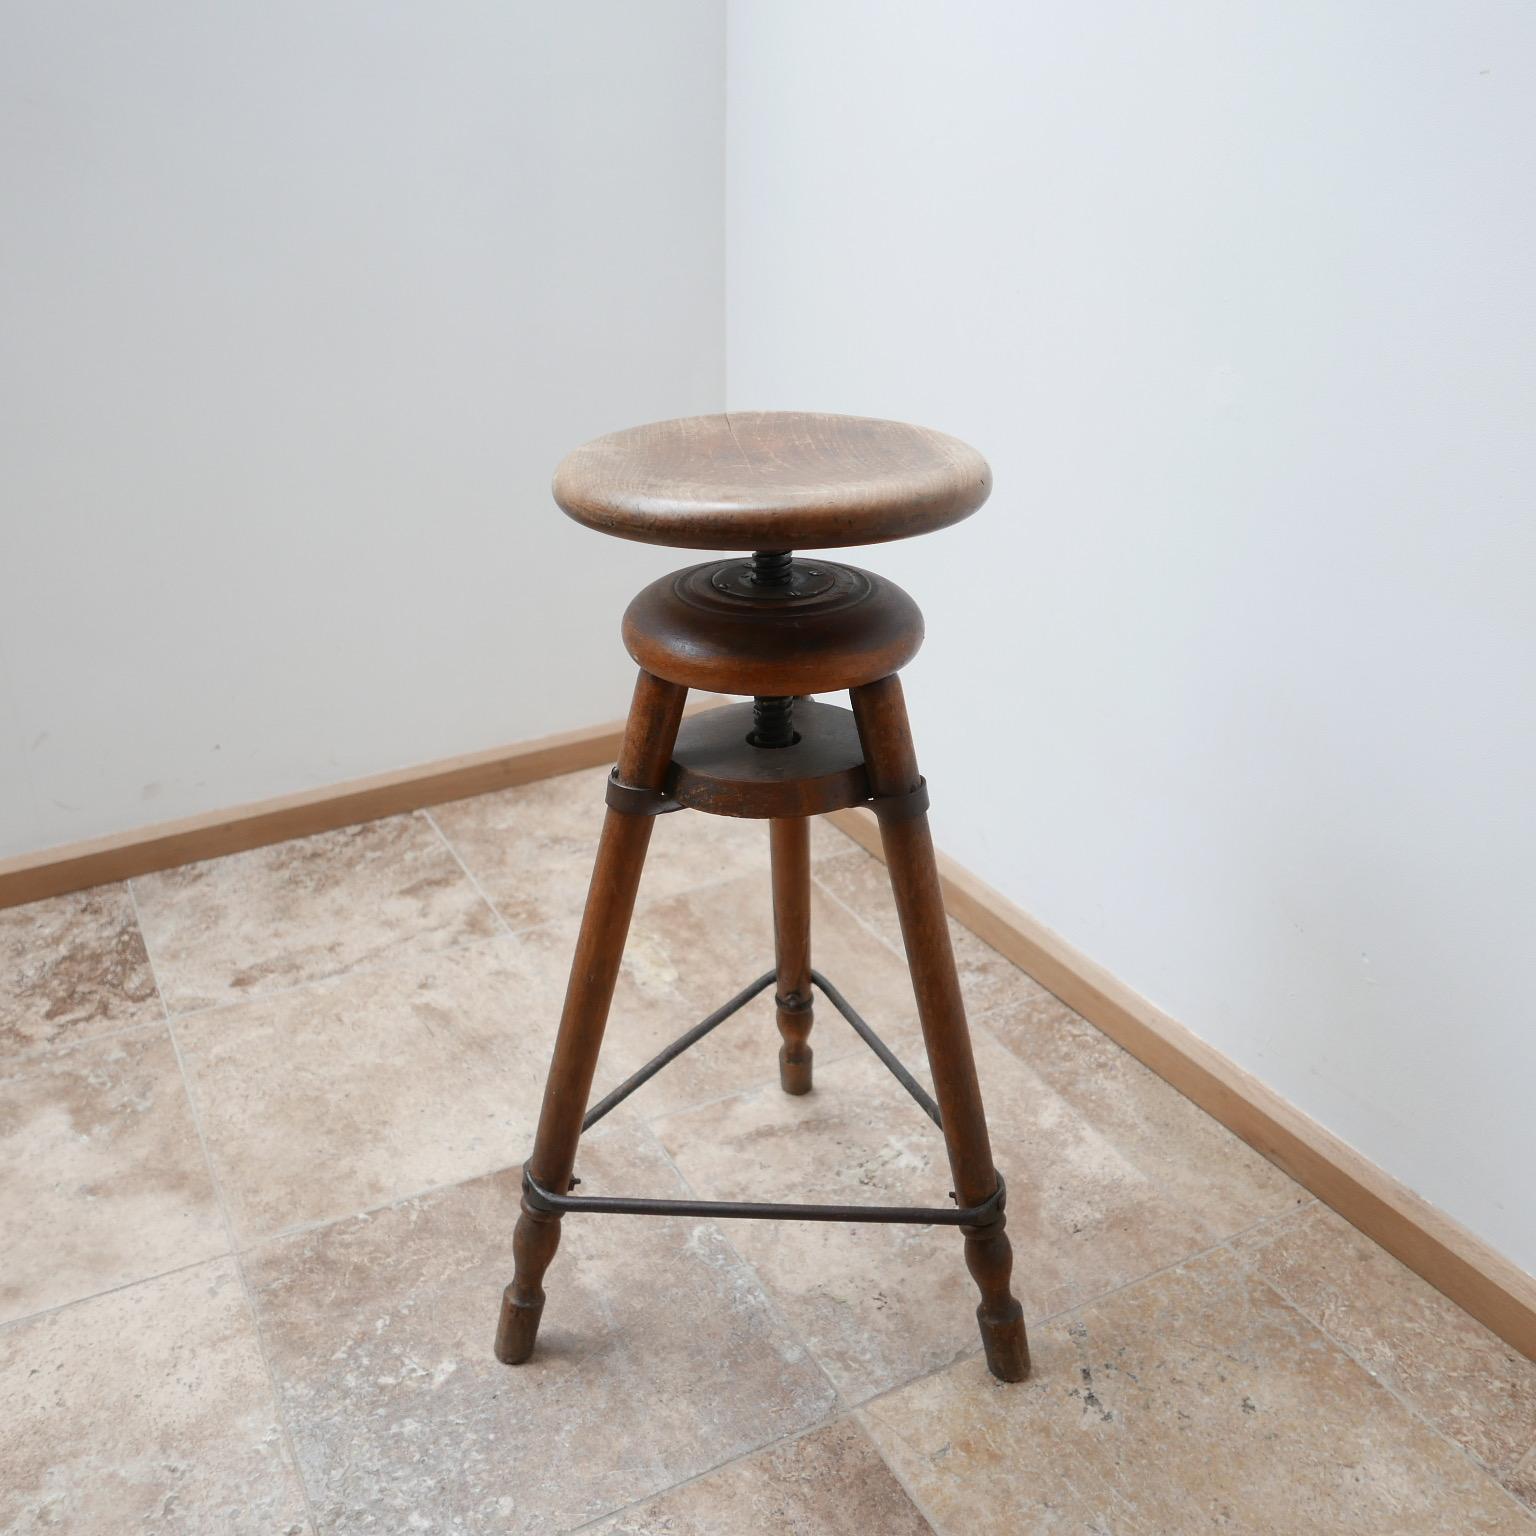 A good quality handmade antique artist stool. 

Fairly flat top so it could be used as a side table or sculpture stand. 

Wood and metal. 

French, late 19th-early 20th century. 

Dimensions: 31 diameter of top x 45 W x 45 D x 67 lowest H x 77